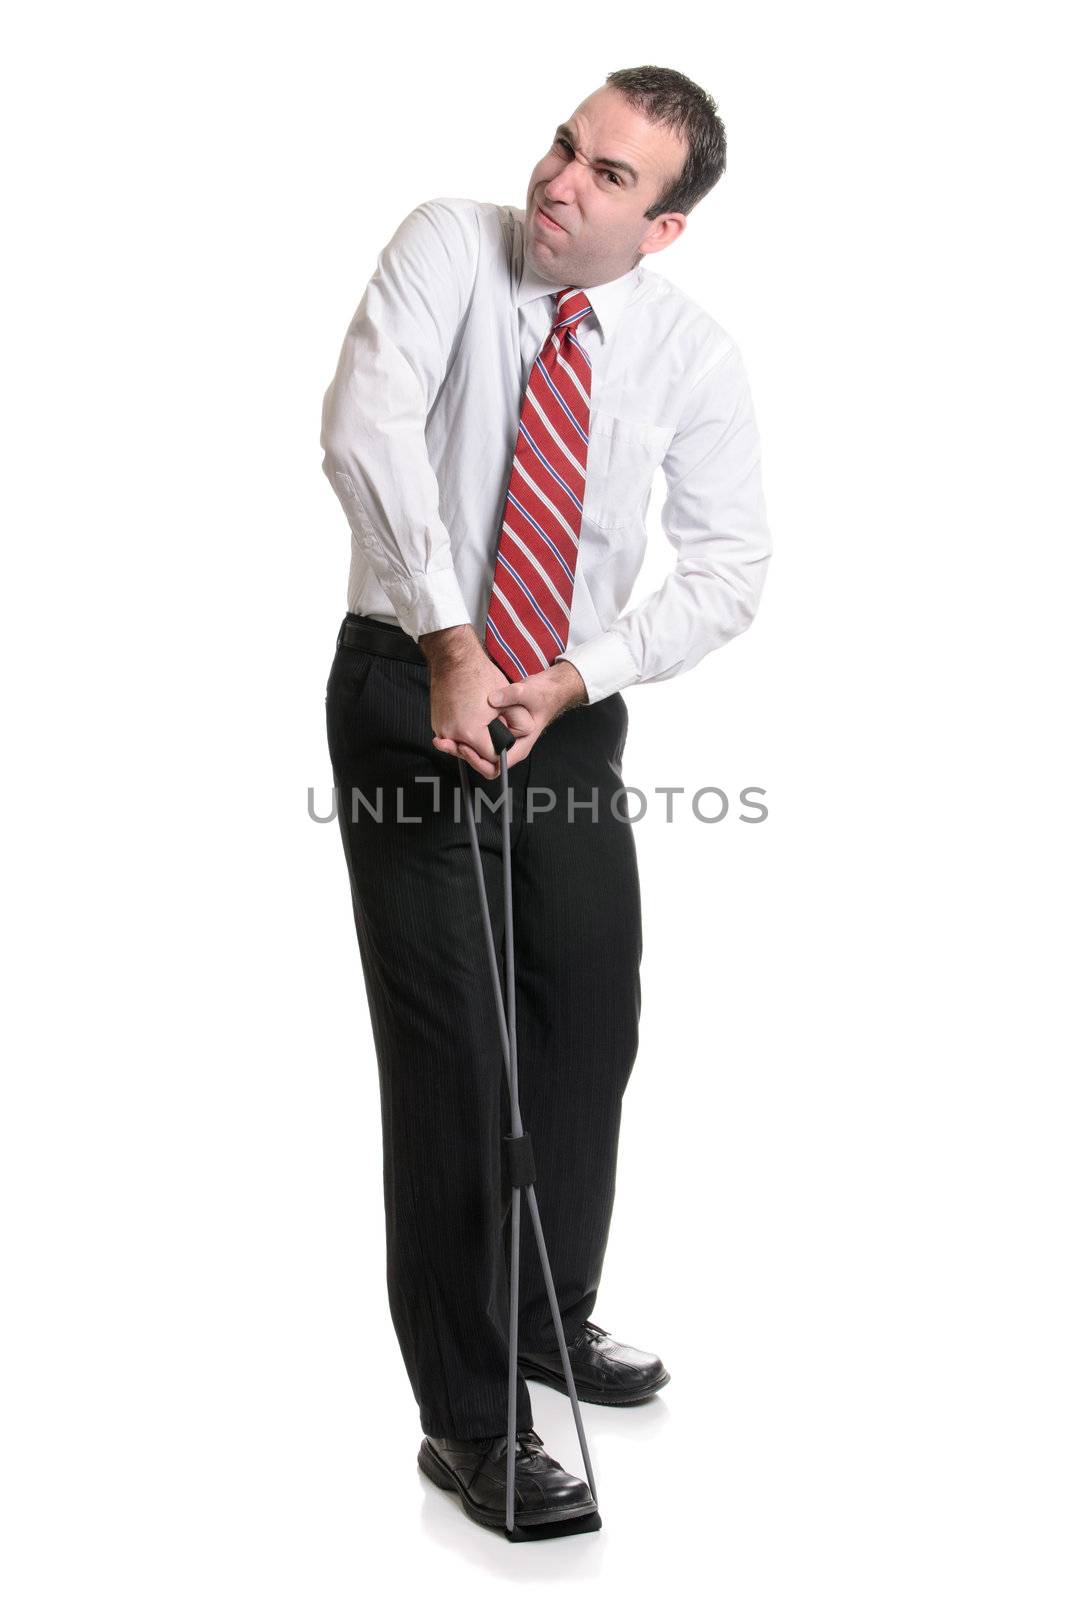 A weak businessman is working hard at doing his exercises to get fit, isolated against a white background.